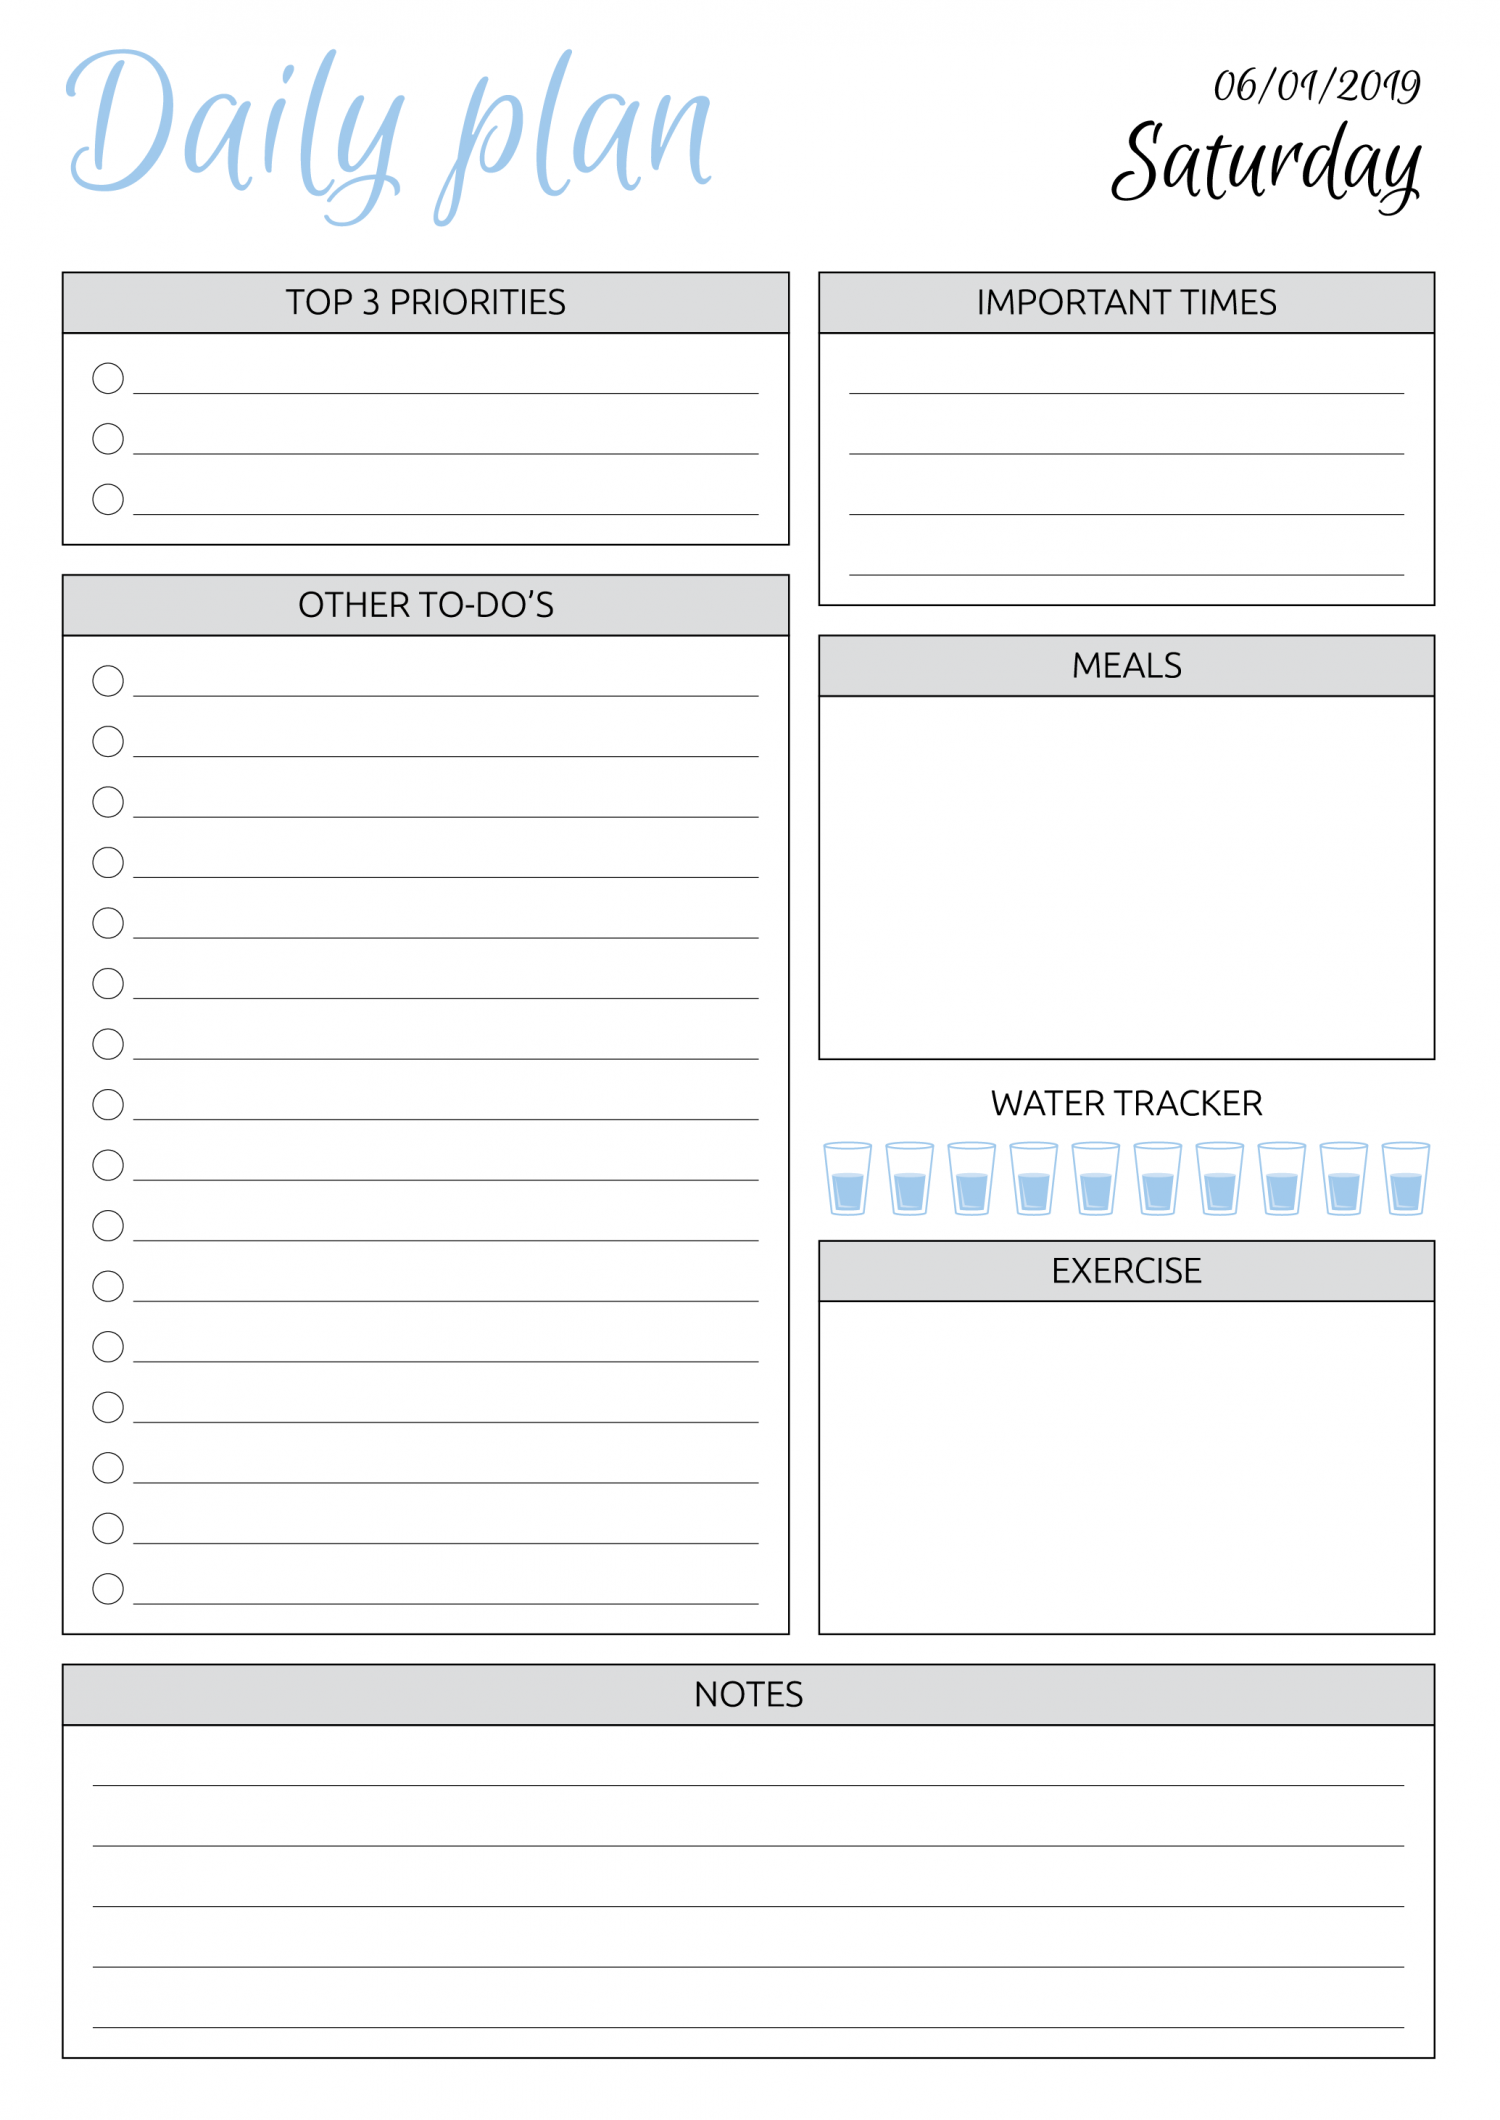 weekly-to-do-list-printable-checklist-template-paper-trail-design